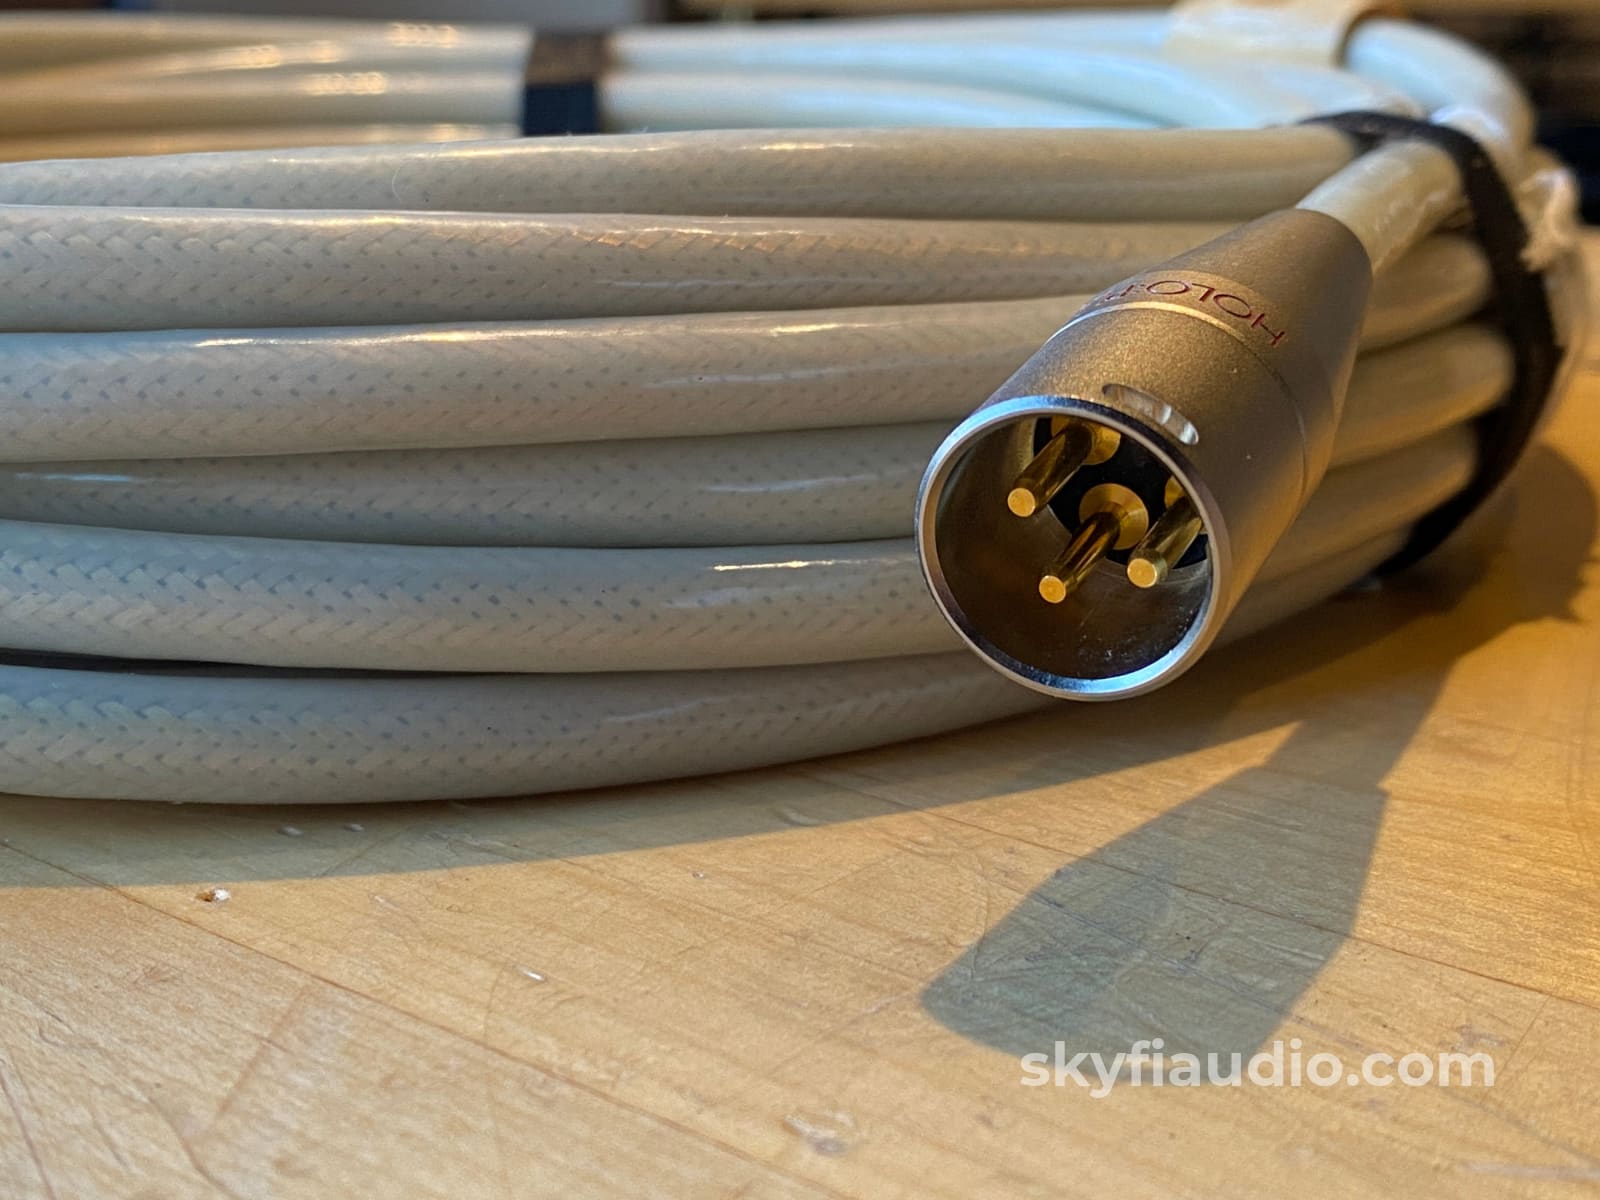 Nordost Valhalla 2 Reference Xlr Audio Interconnect 11M - Super Long Cables